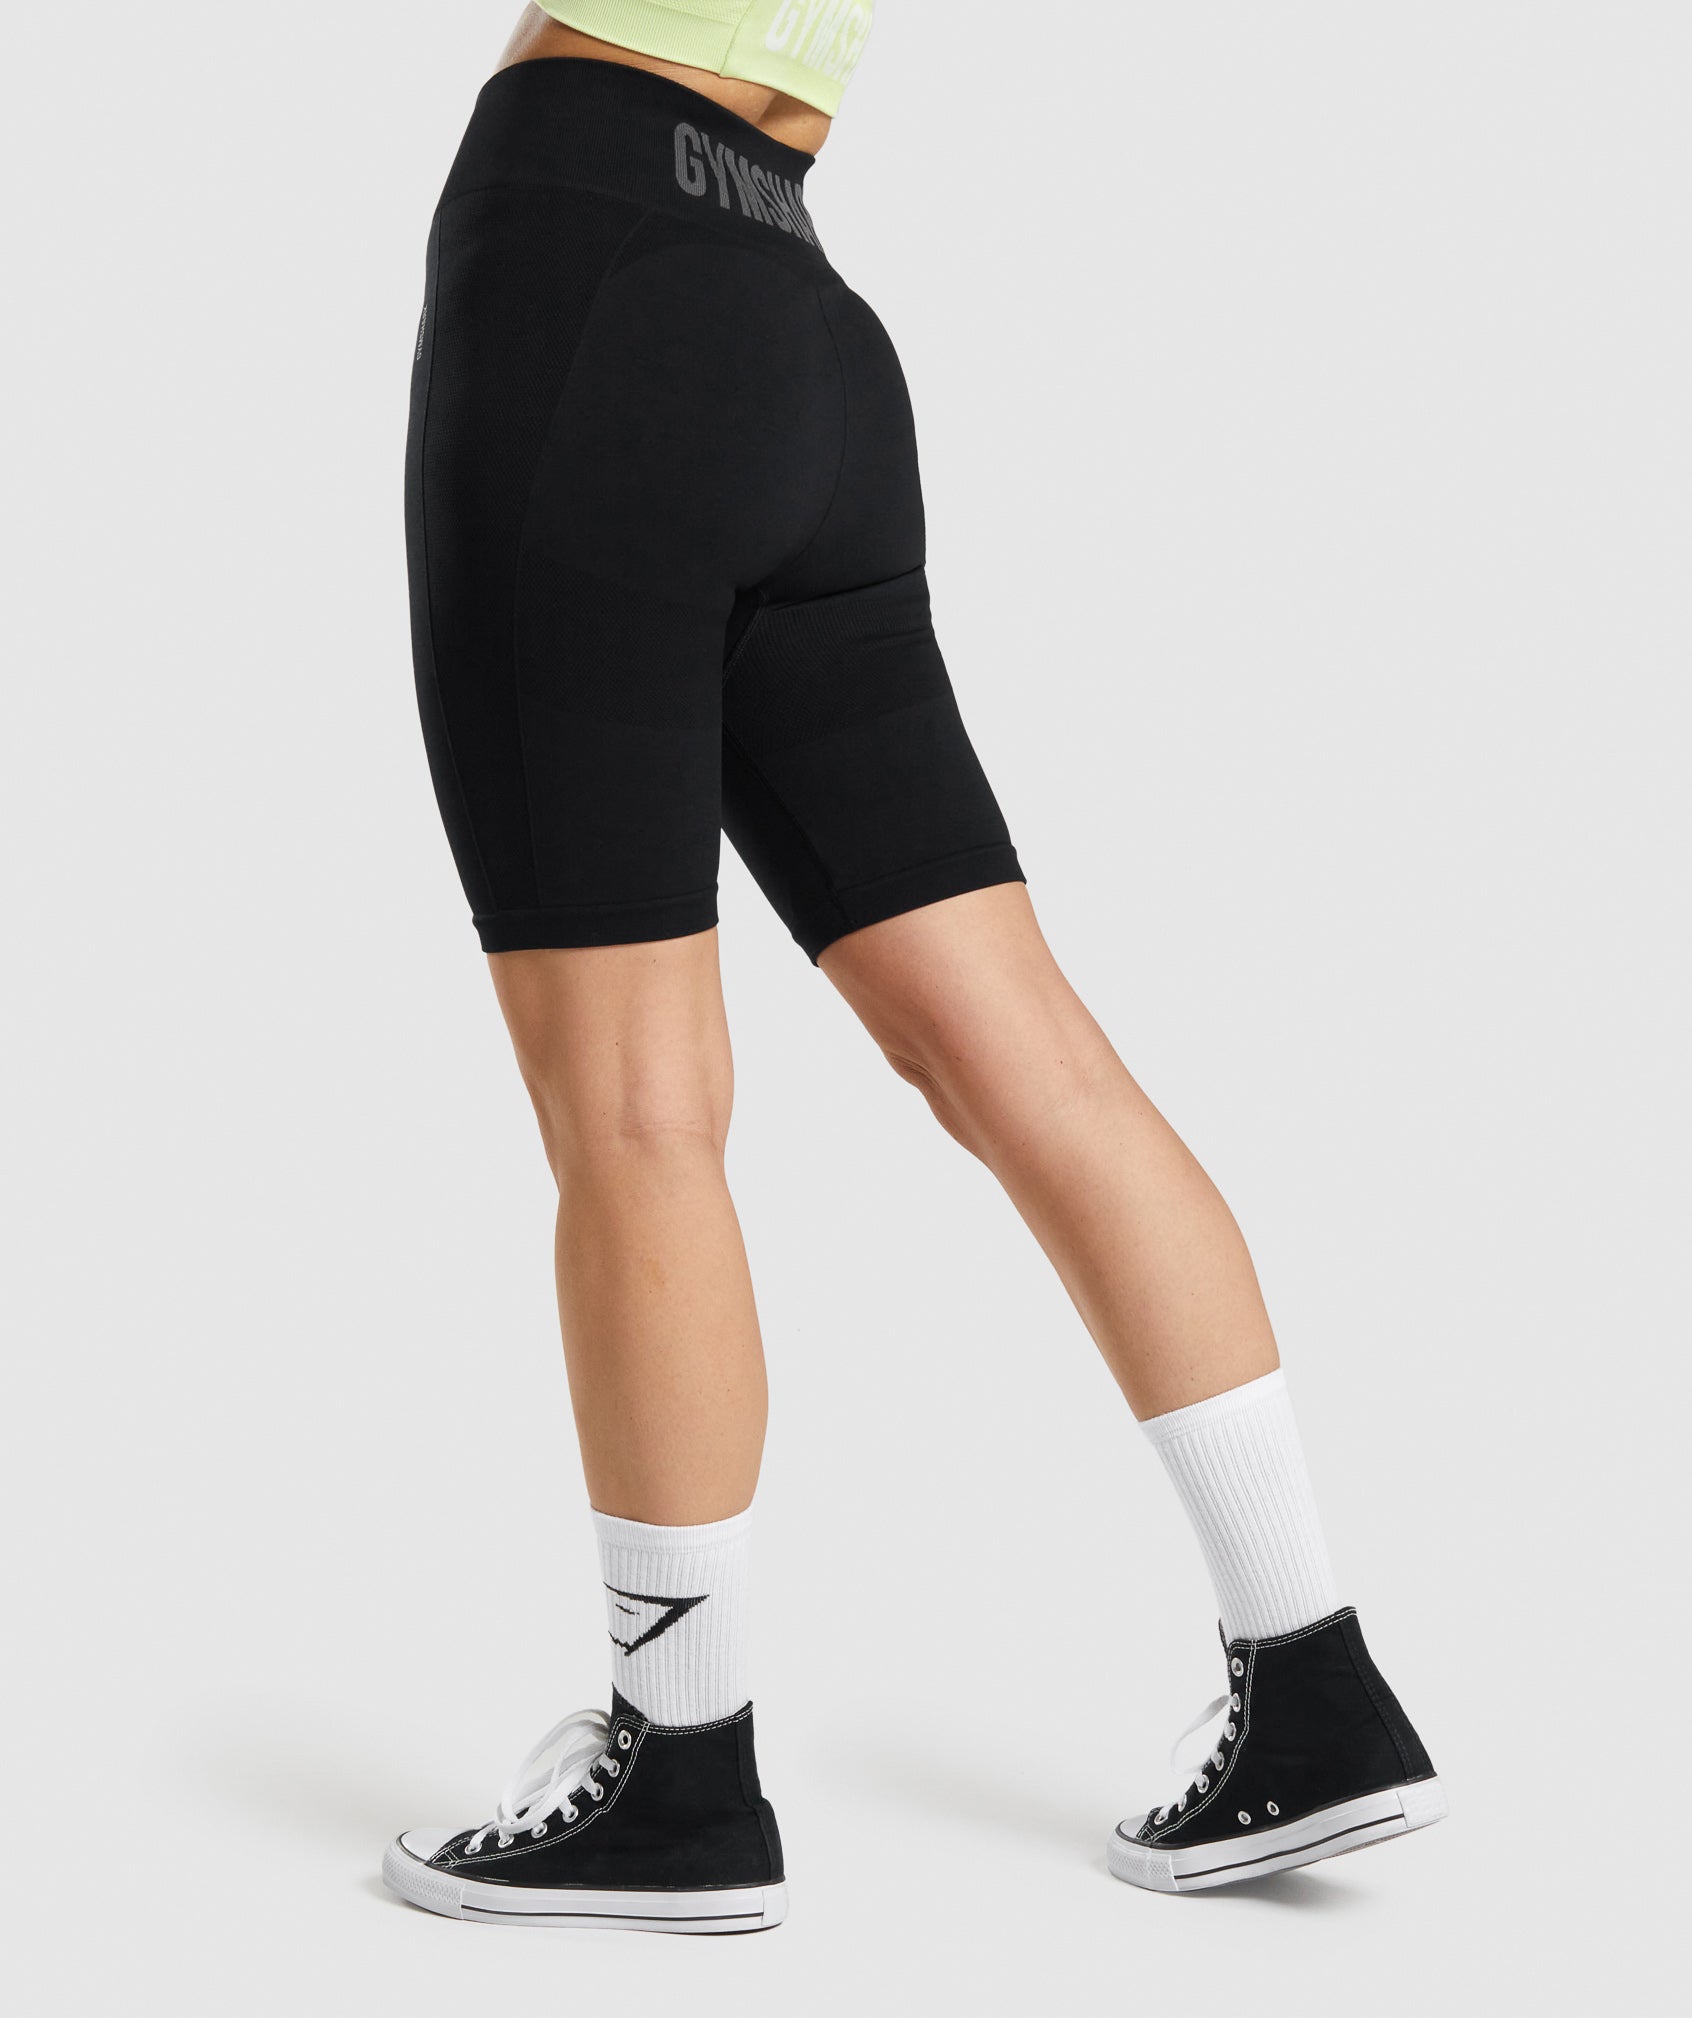 Flex Cycling Shorts in Black/Charcoal - view 4